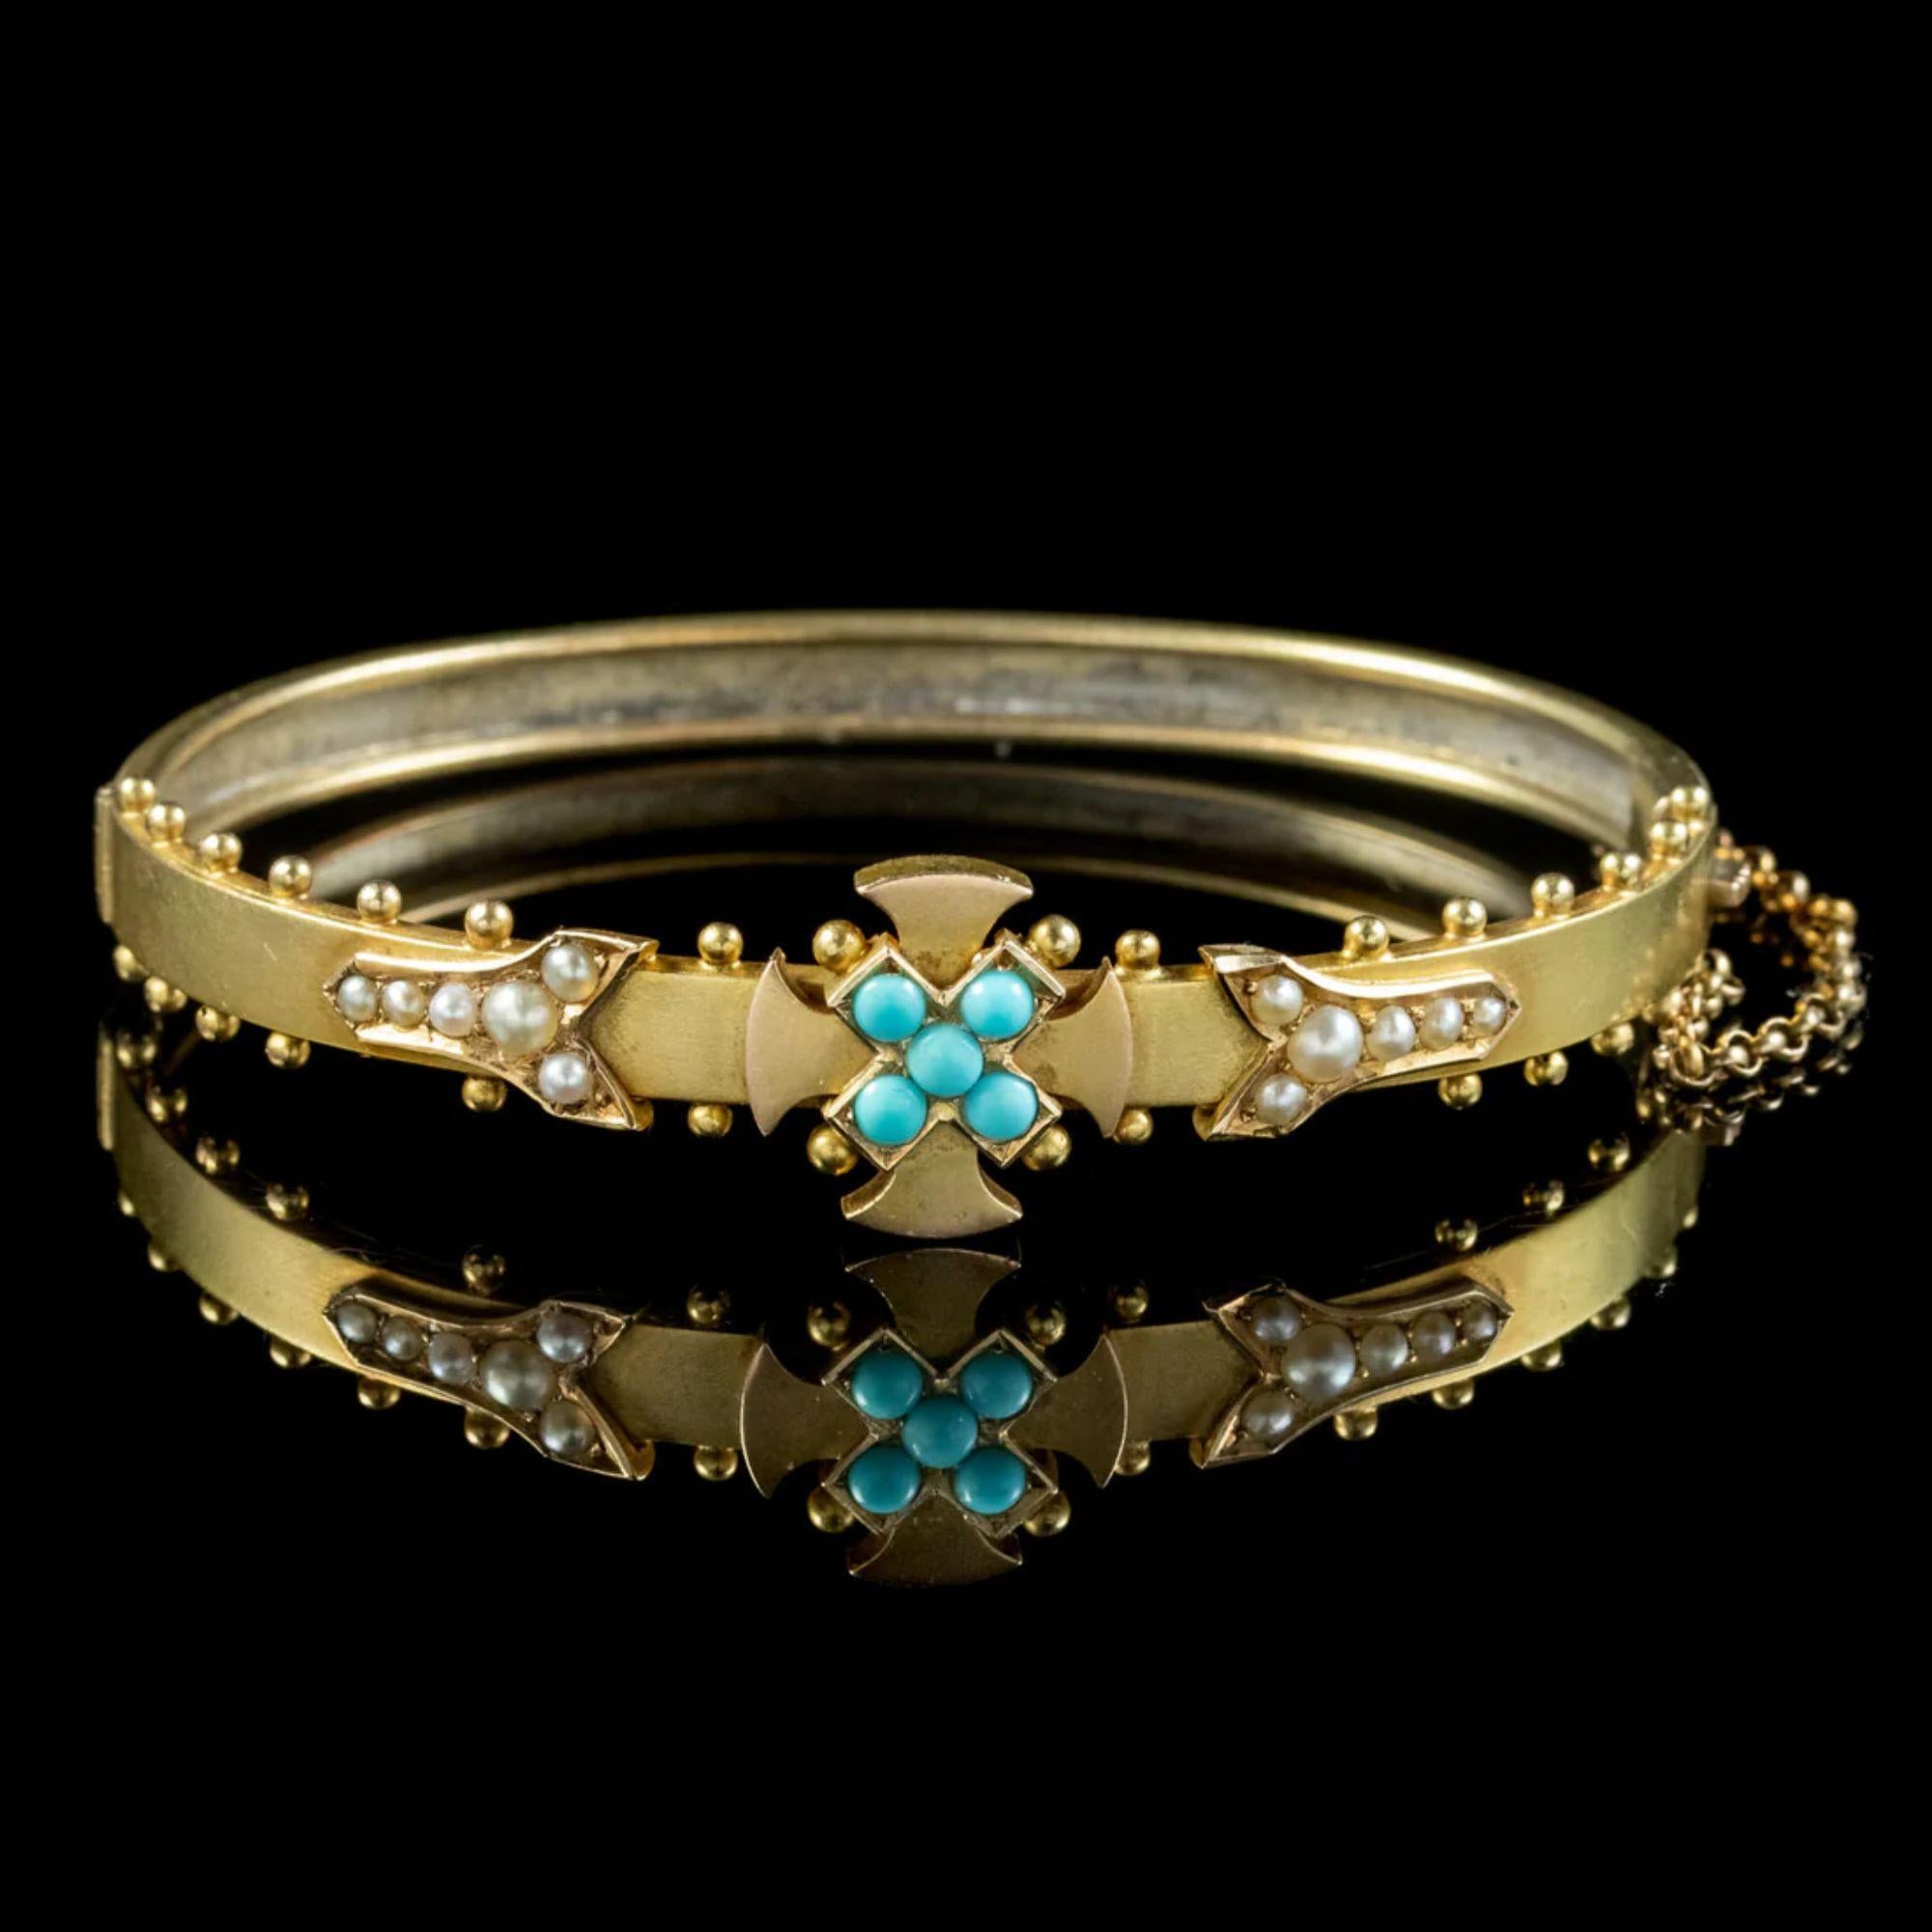 An exquisite antique Victorian bangle from the late 19th Century featuring a Celtic cross on the front decorated with five turquoise and a row of pearls at each side.

The band is crafted in 15ct gold and held securely around the wrist by a box